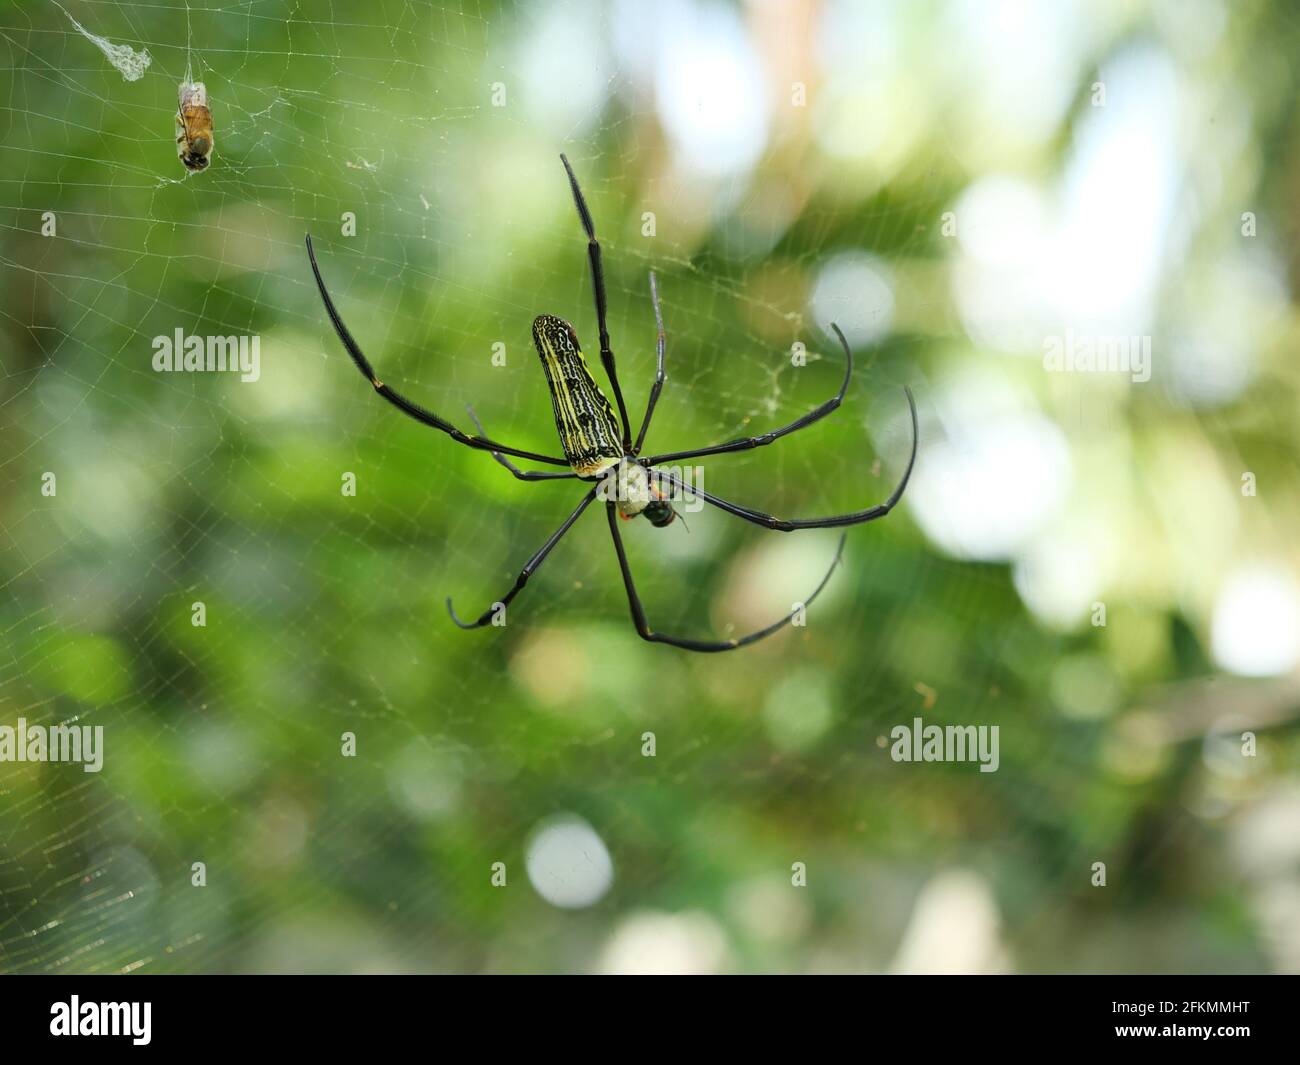 Green with yellow pattern and long black legs of the Garden Spider on web trap insects with natural green background, Honey bee is trapped and become Stock Photo